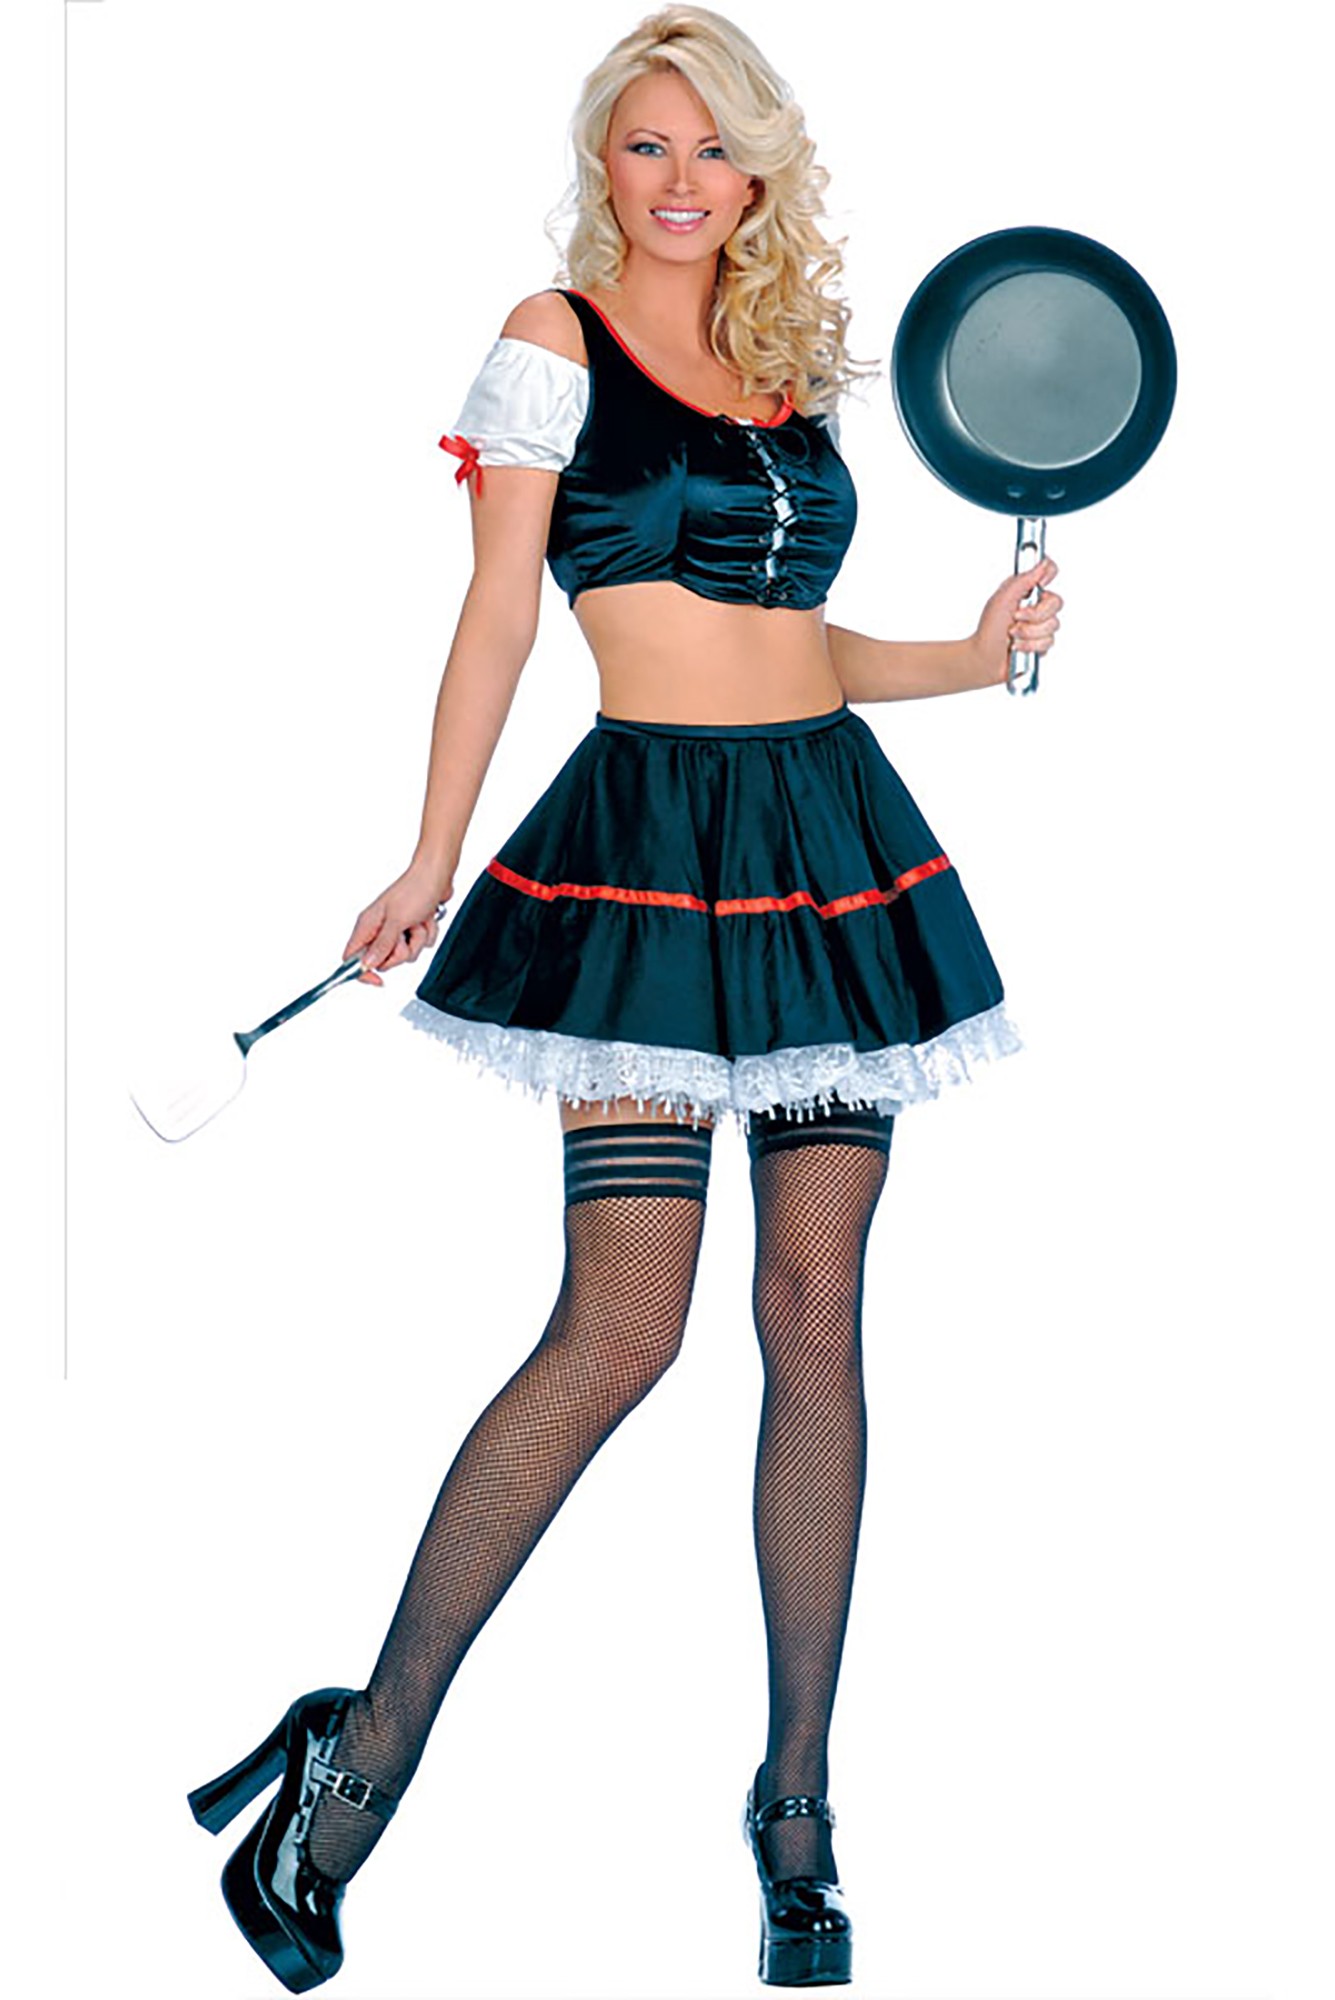 housewife in different costumes Porn Photos